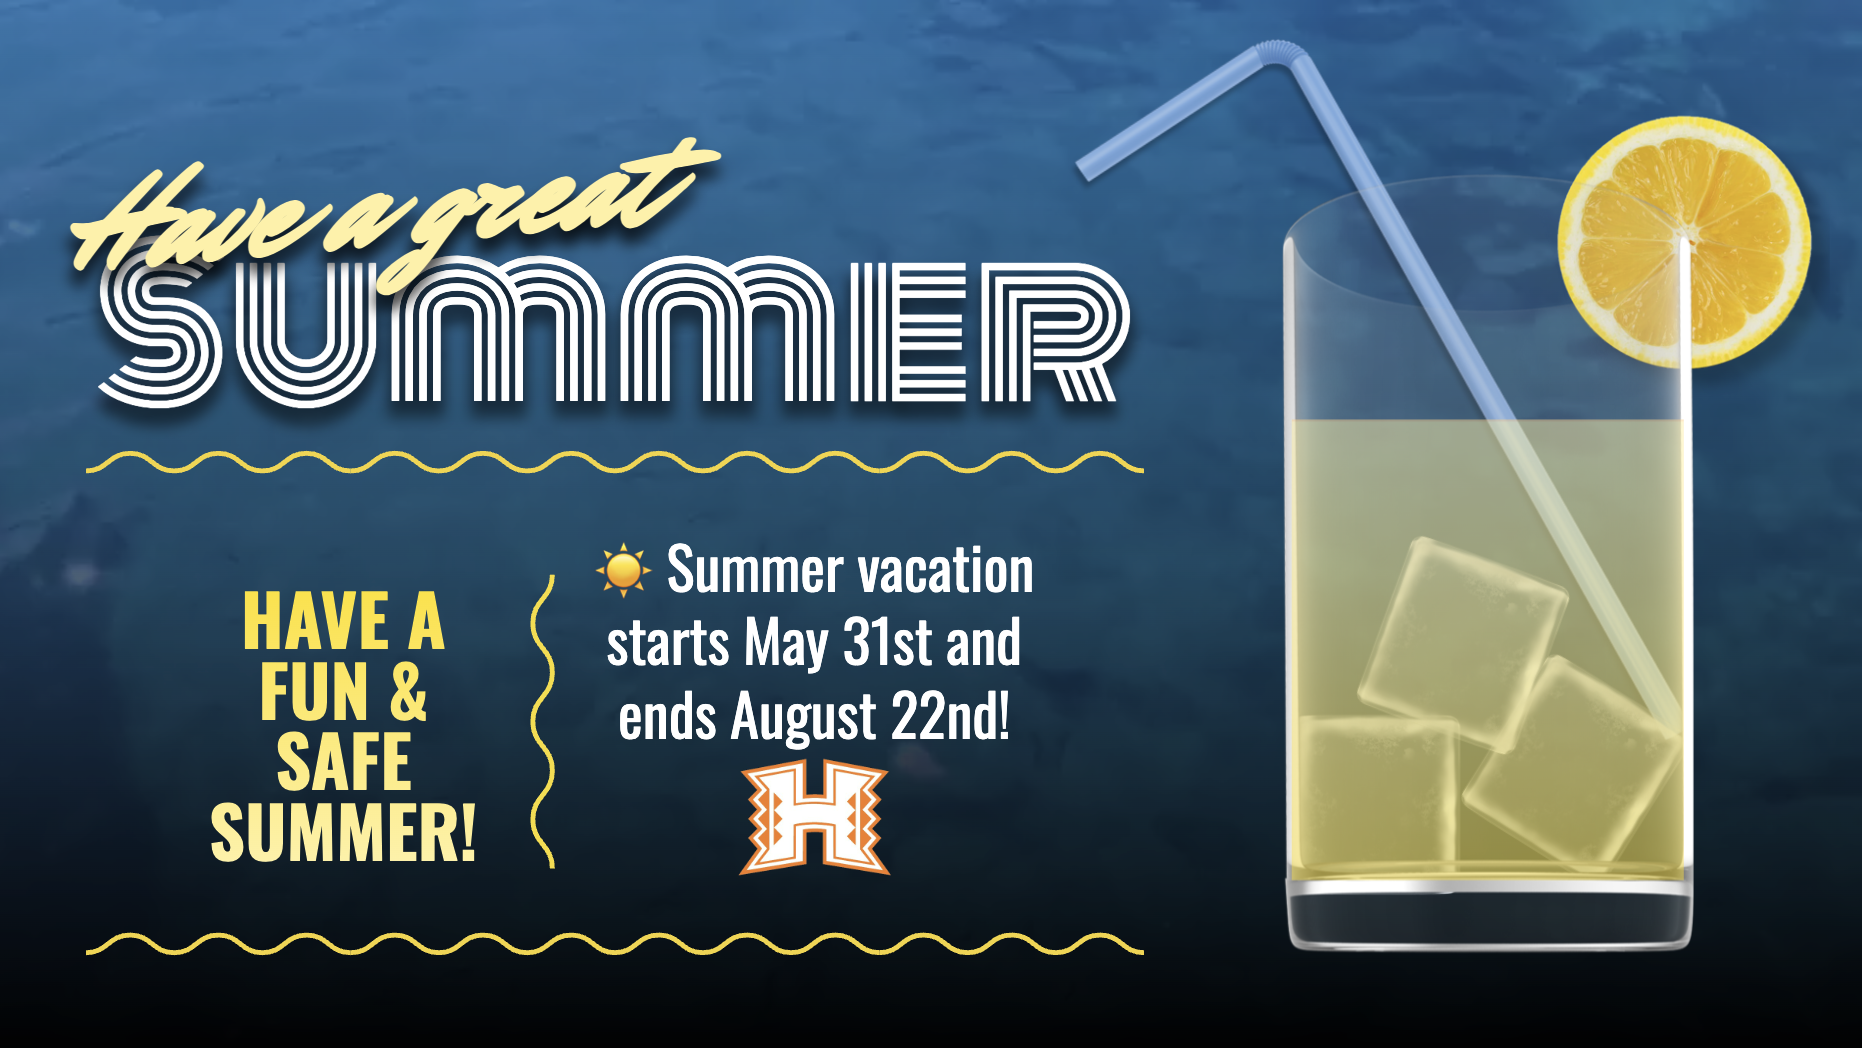 Have a great Summer! HAVE A FUN & SAFE SUMMER! Summer vacation starts May 31st and ends August 22nd!